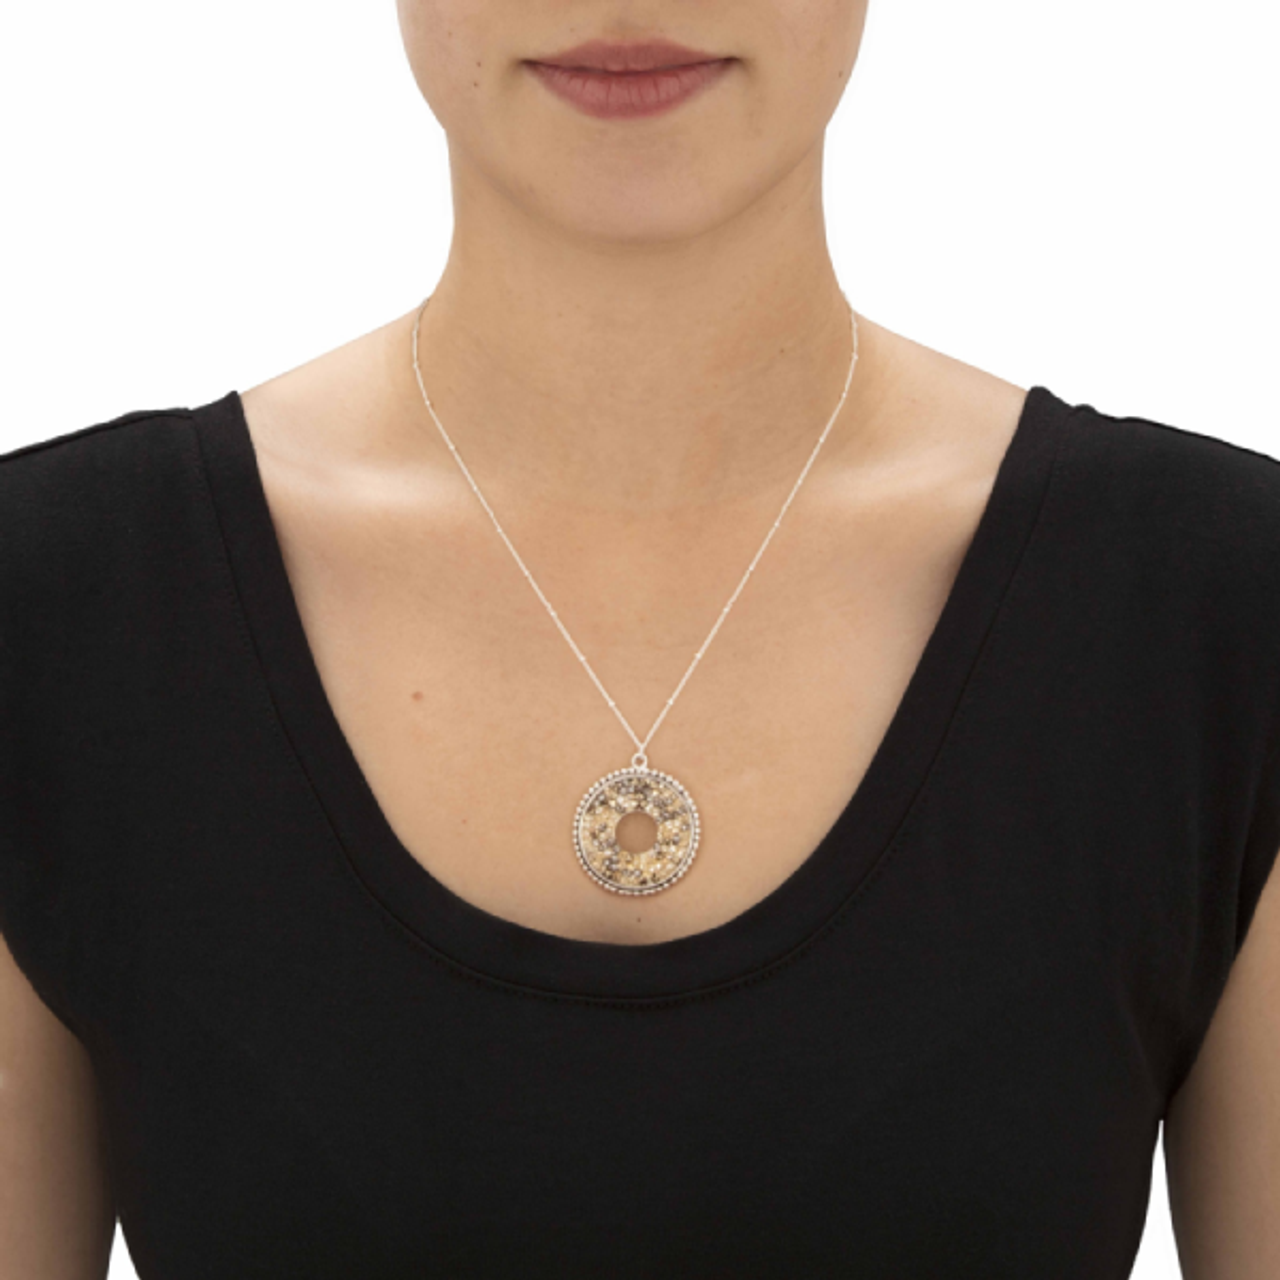 Brown Simulated Druzy Circle Pendant Necklace product image